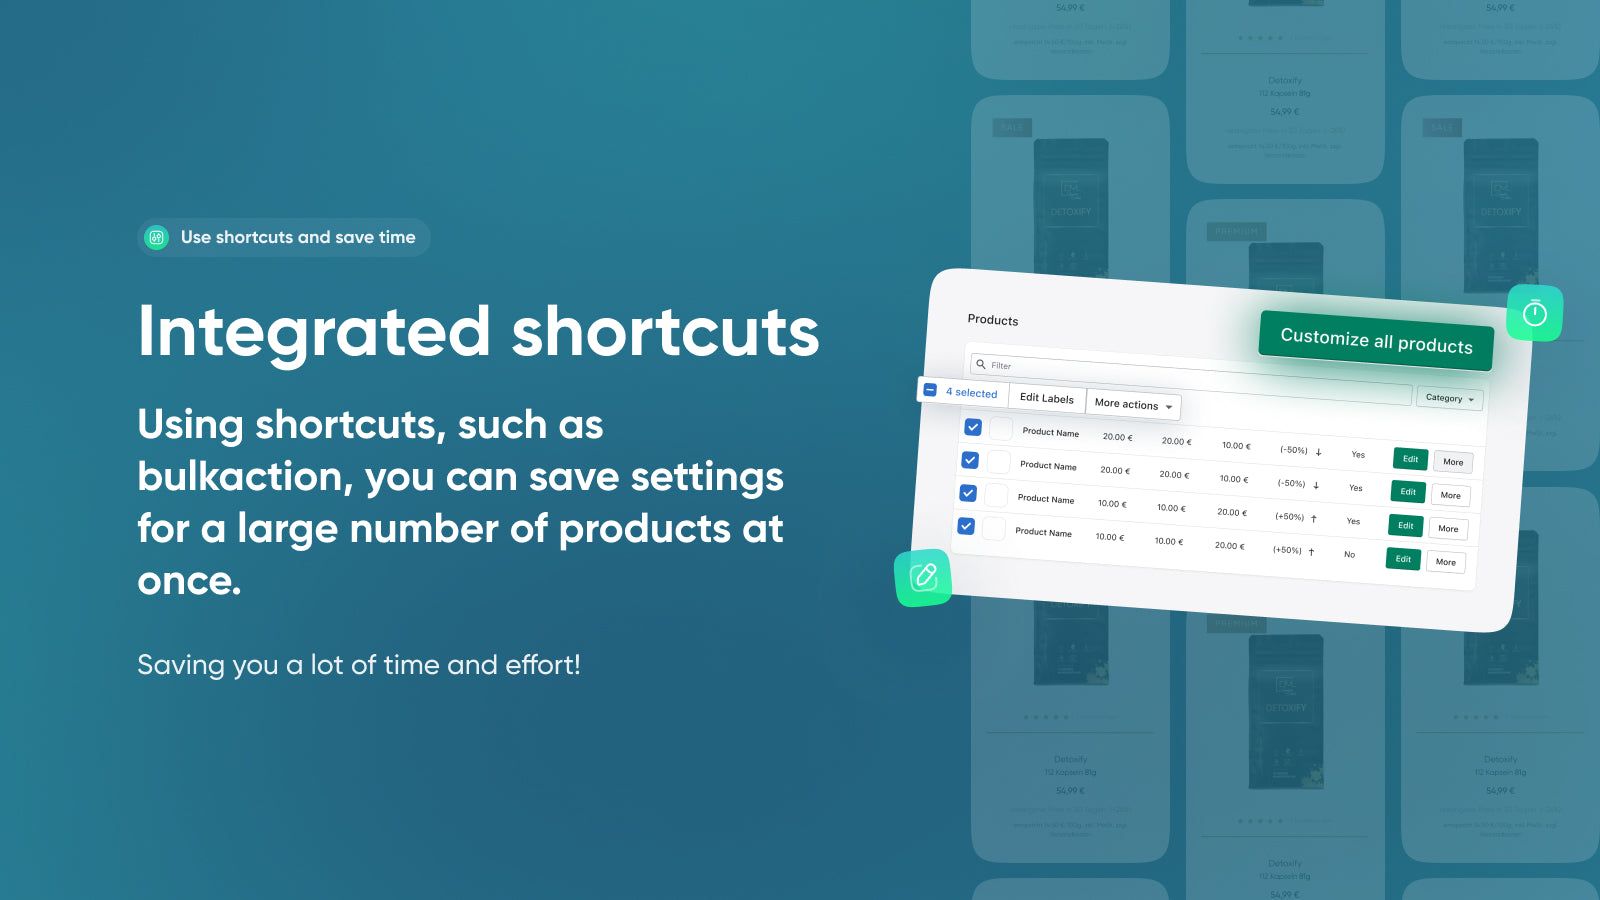 Use shortcuts such as bulkaction to edit multiple products.